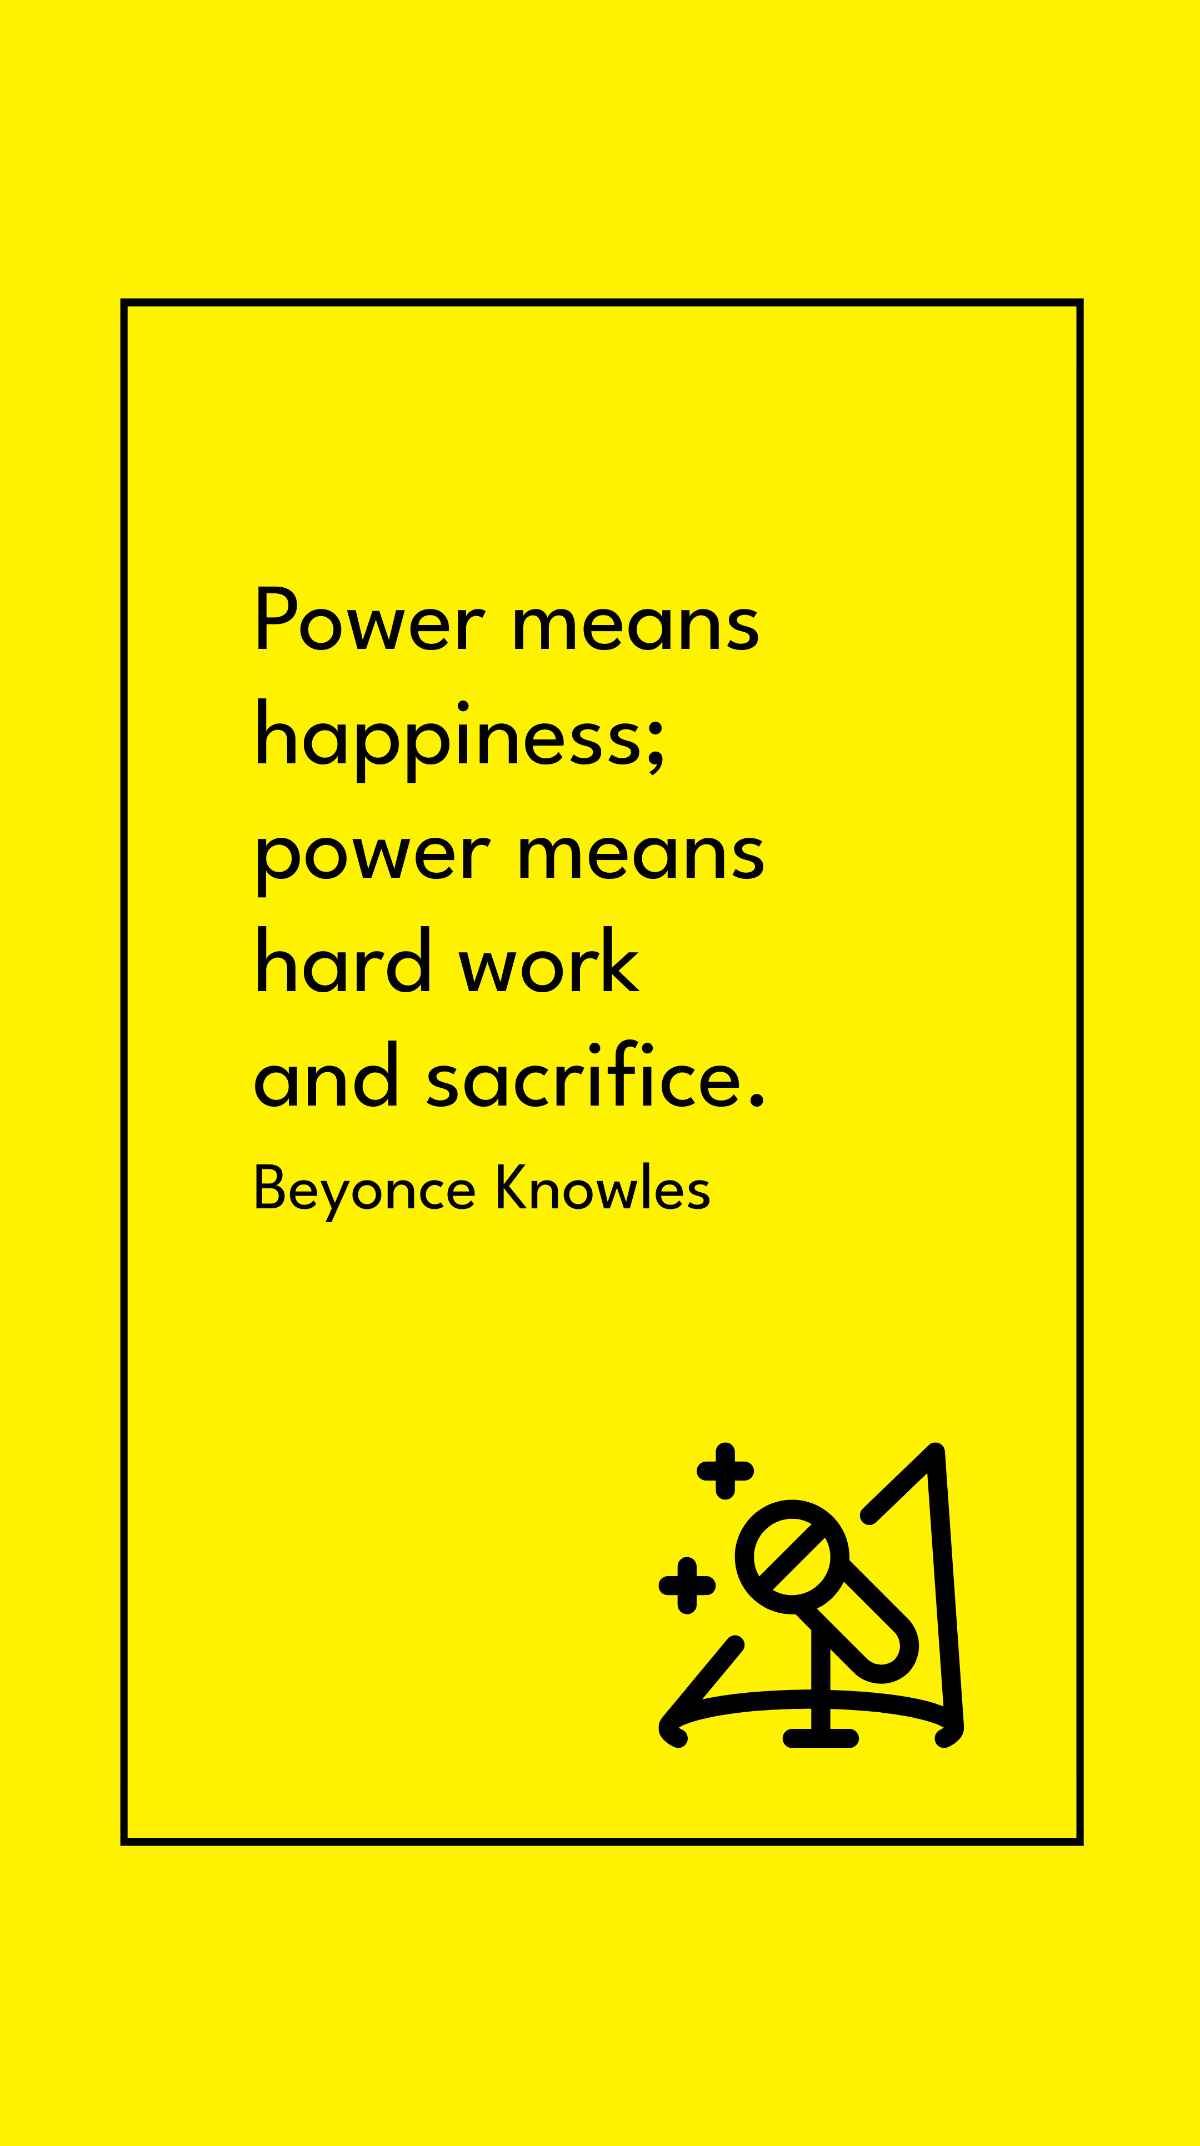 Free Beyonce Knowles - Power means happiness; power means hard work and sacrifice. Template